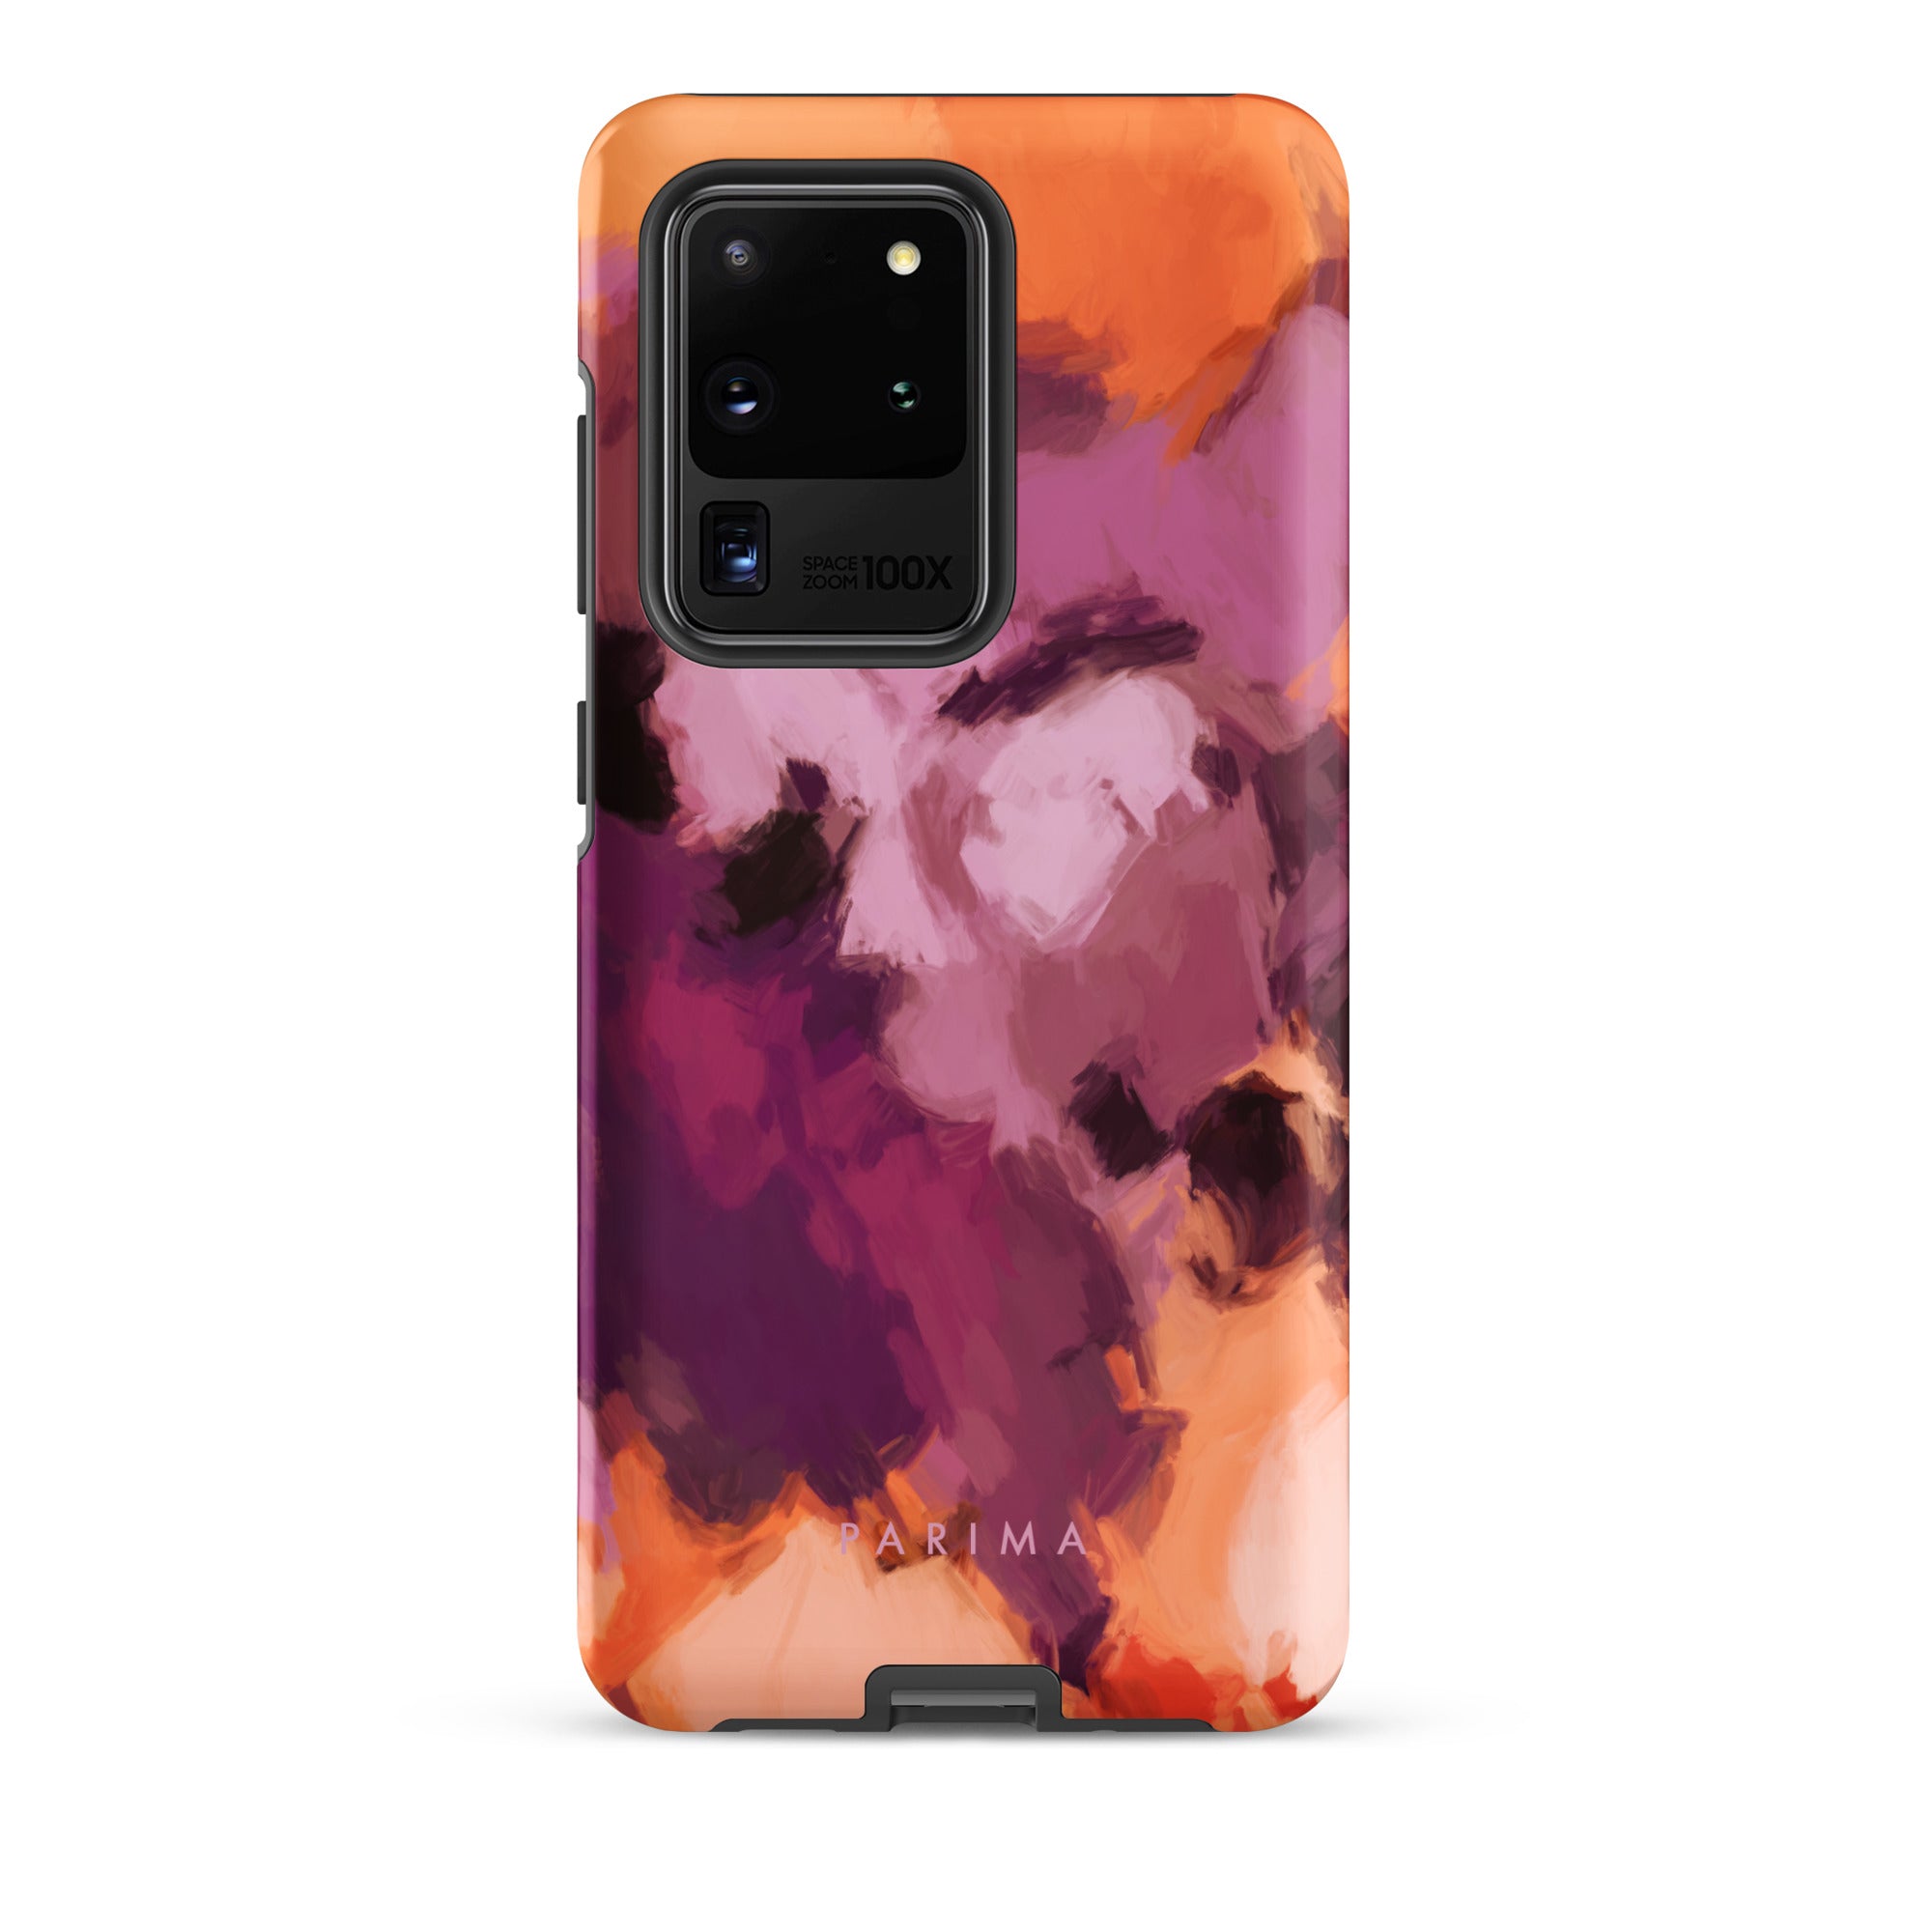 Lilac, purple and orange abstract art on Samsung Galaxy S20 Ultra tough case by Parima Studio